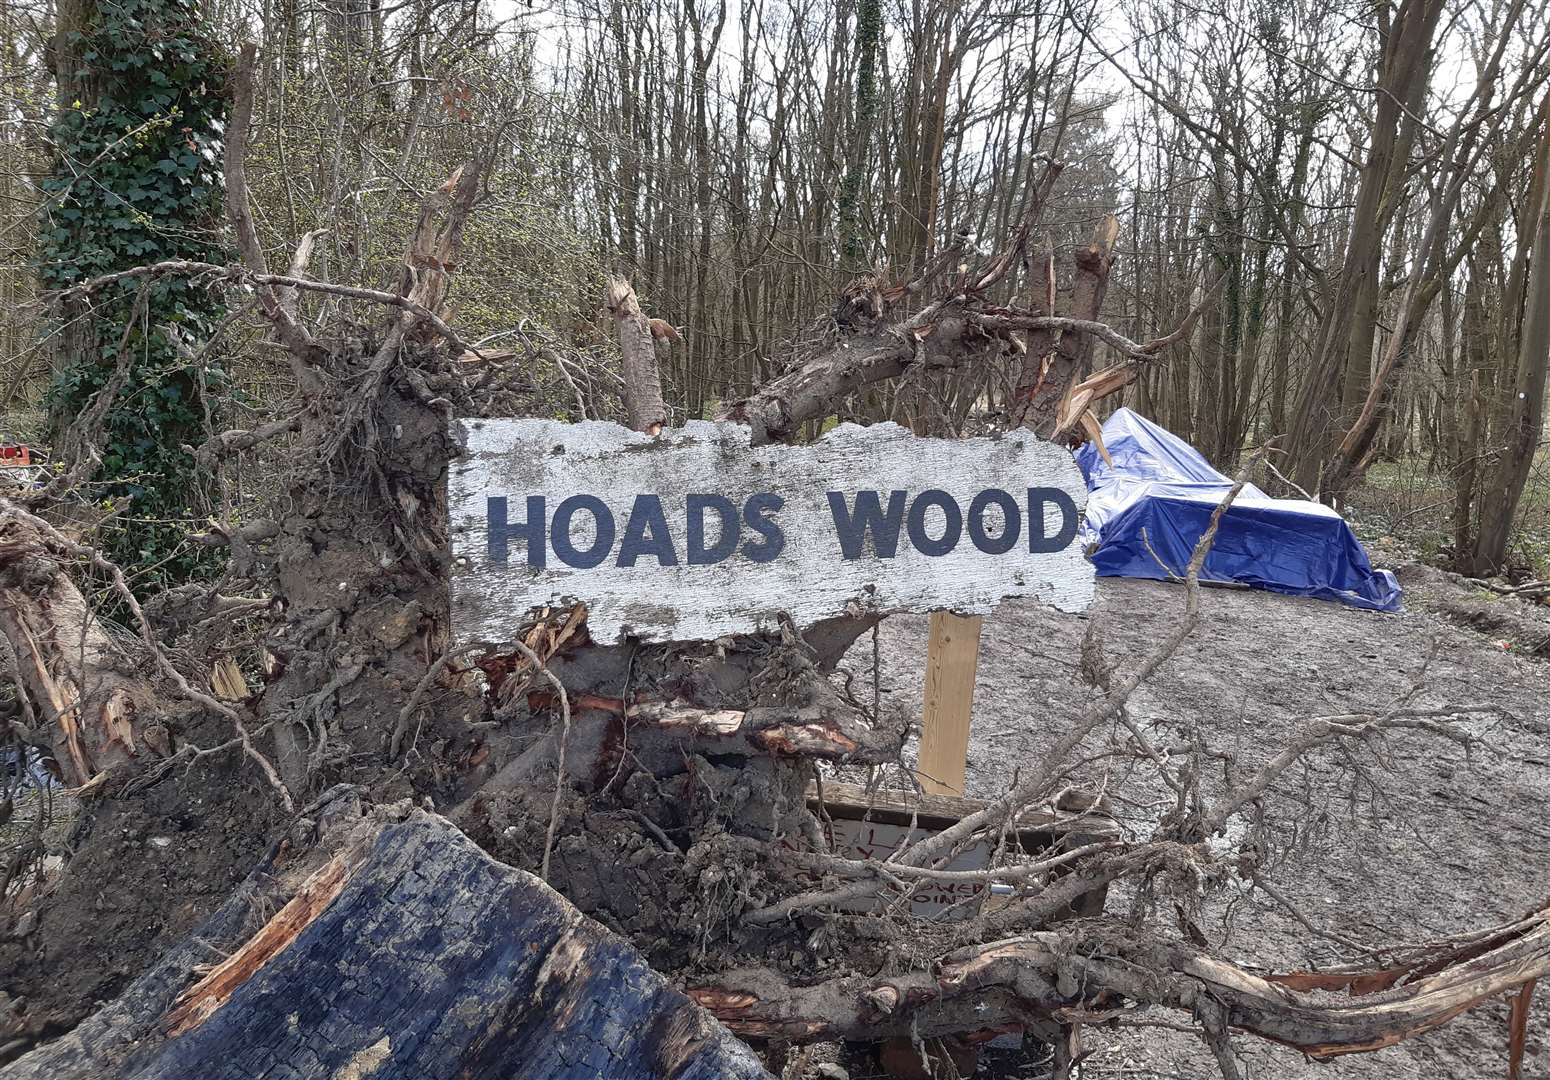 The 200-acre Hoads Wood is next to the Ashford to Charing Cross railway line